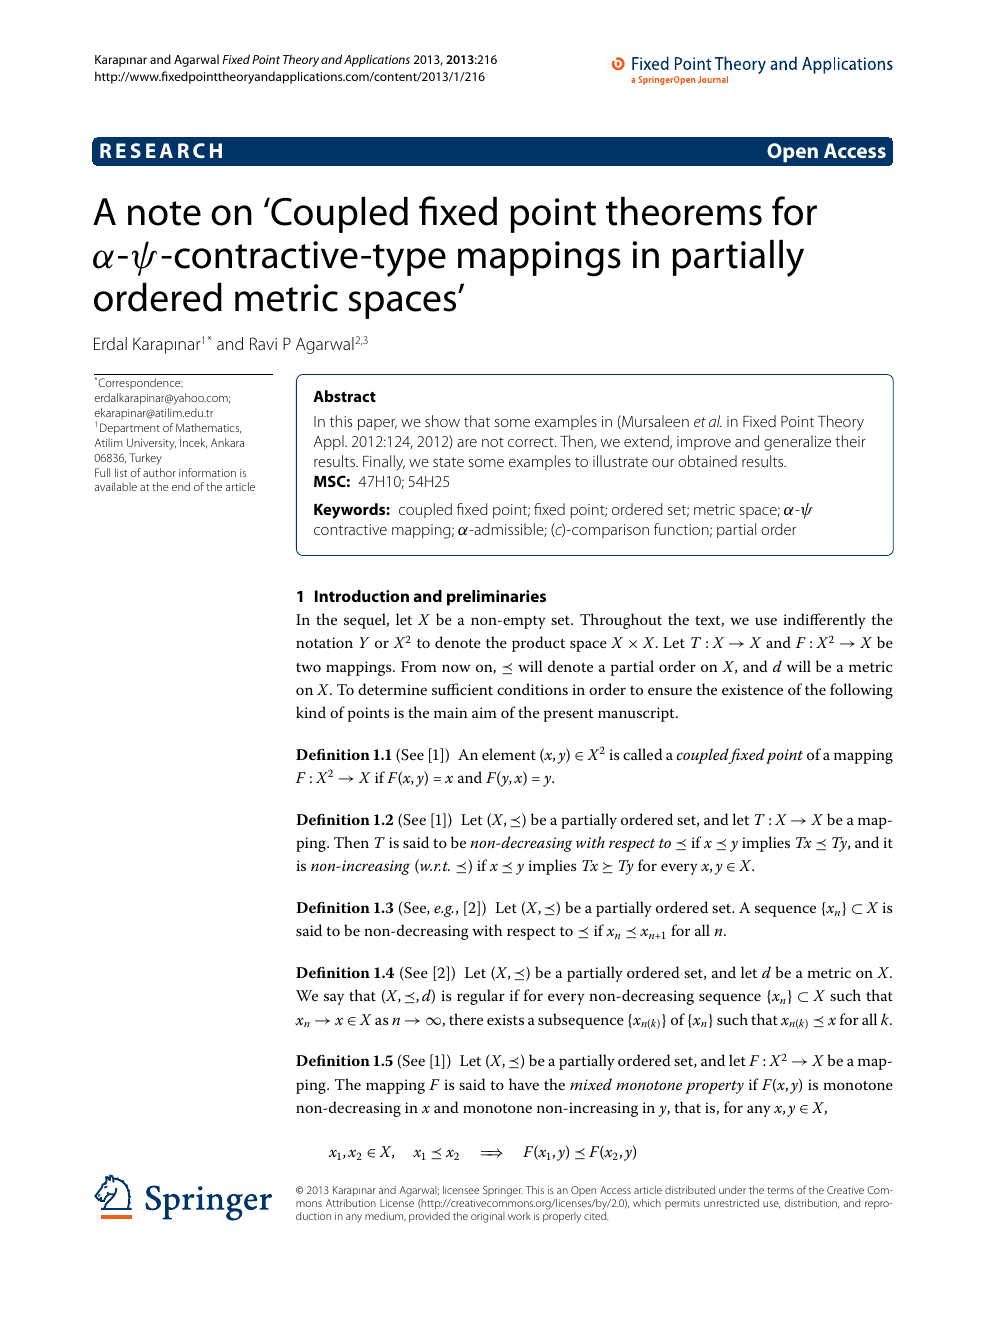 A Note On Coupled Fixed Point Theorems For Alpha Psi Contractive Type Mappings In Partially Ordered Metric Spaces Topic Of Research Paper In Mathematics Download Scholarly Article Pdf And Read For Free On